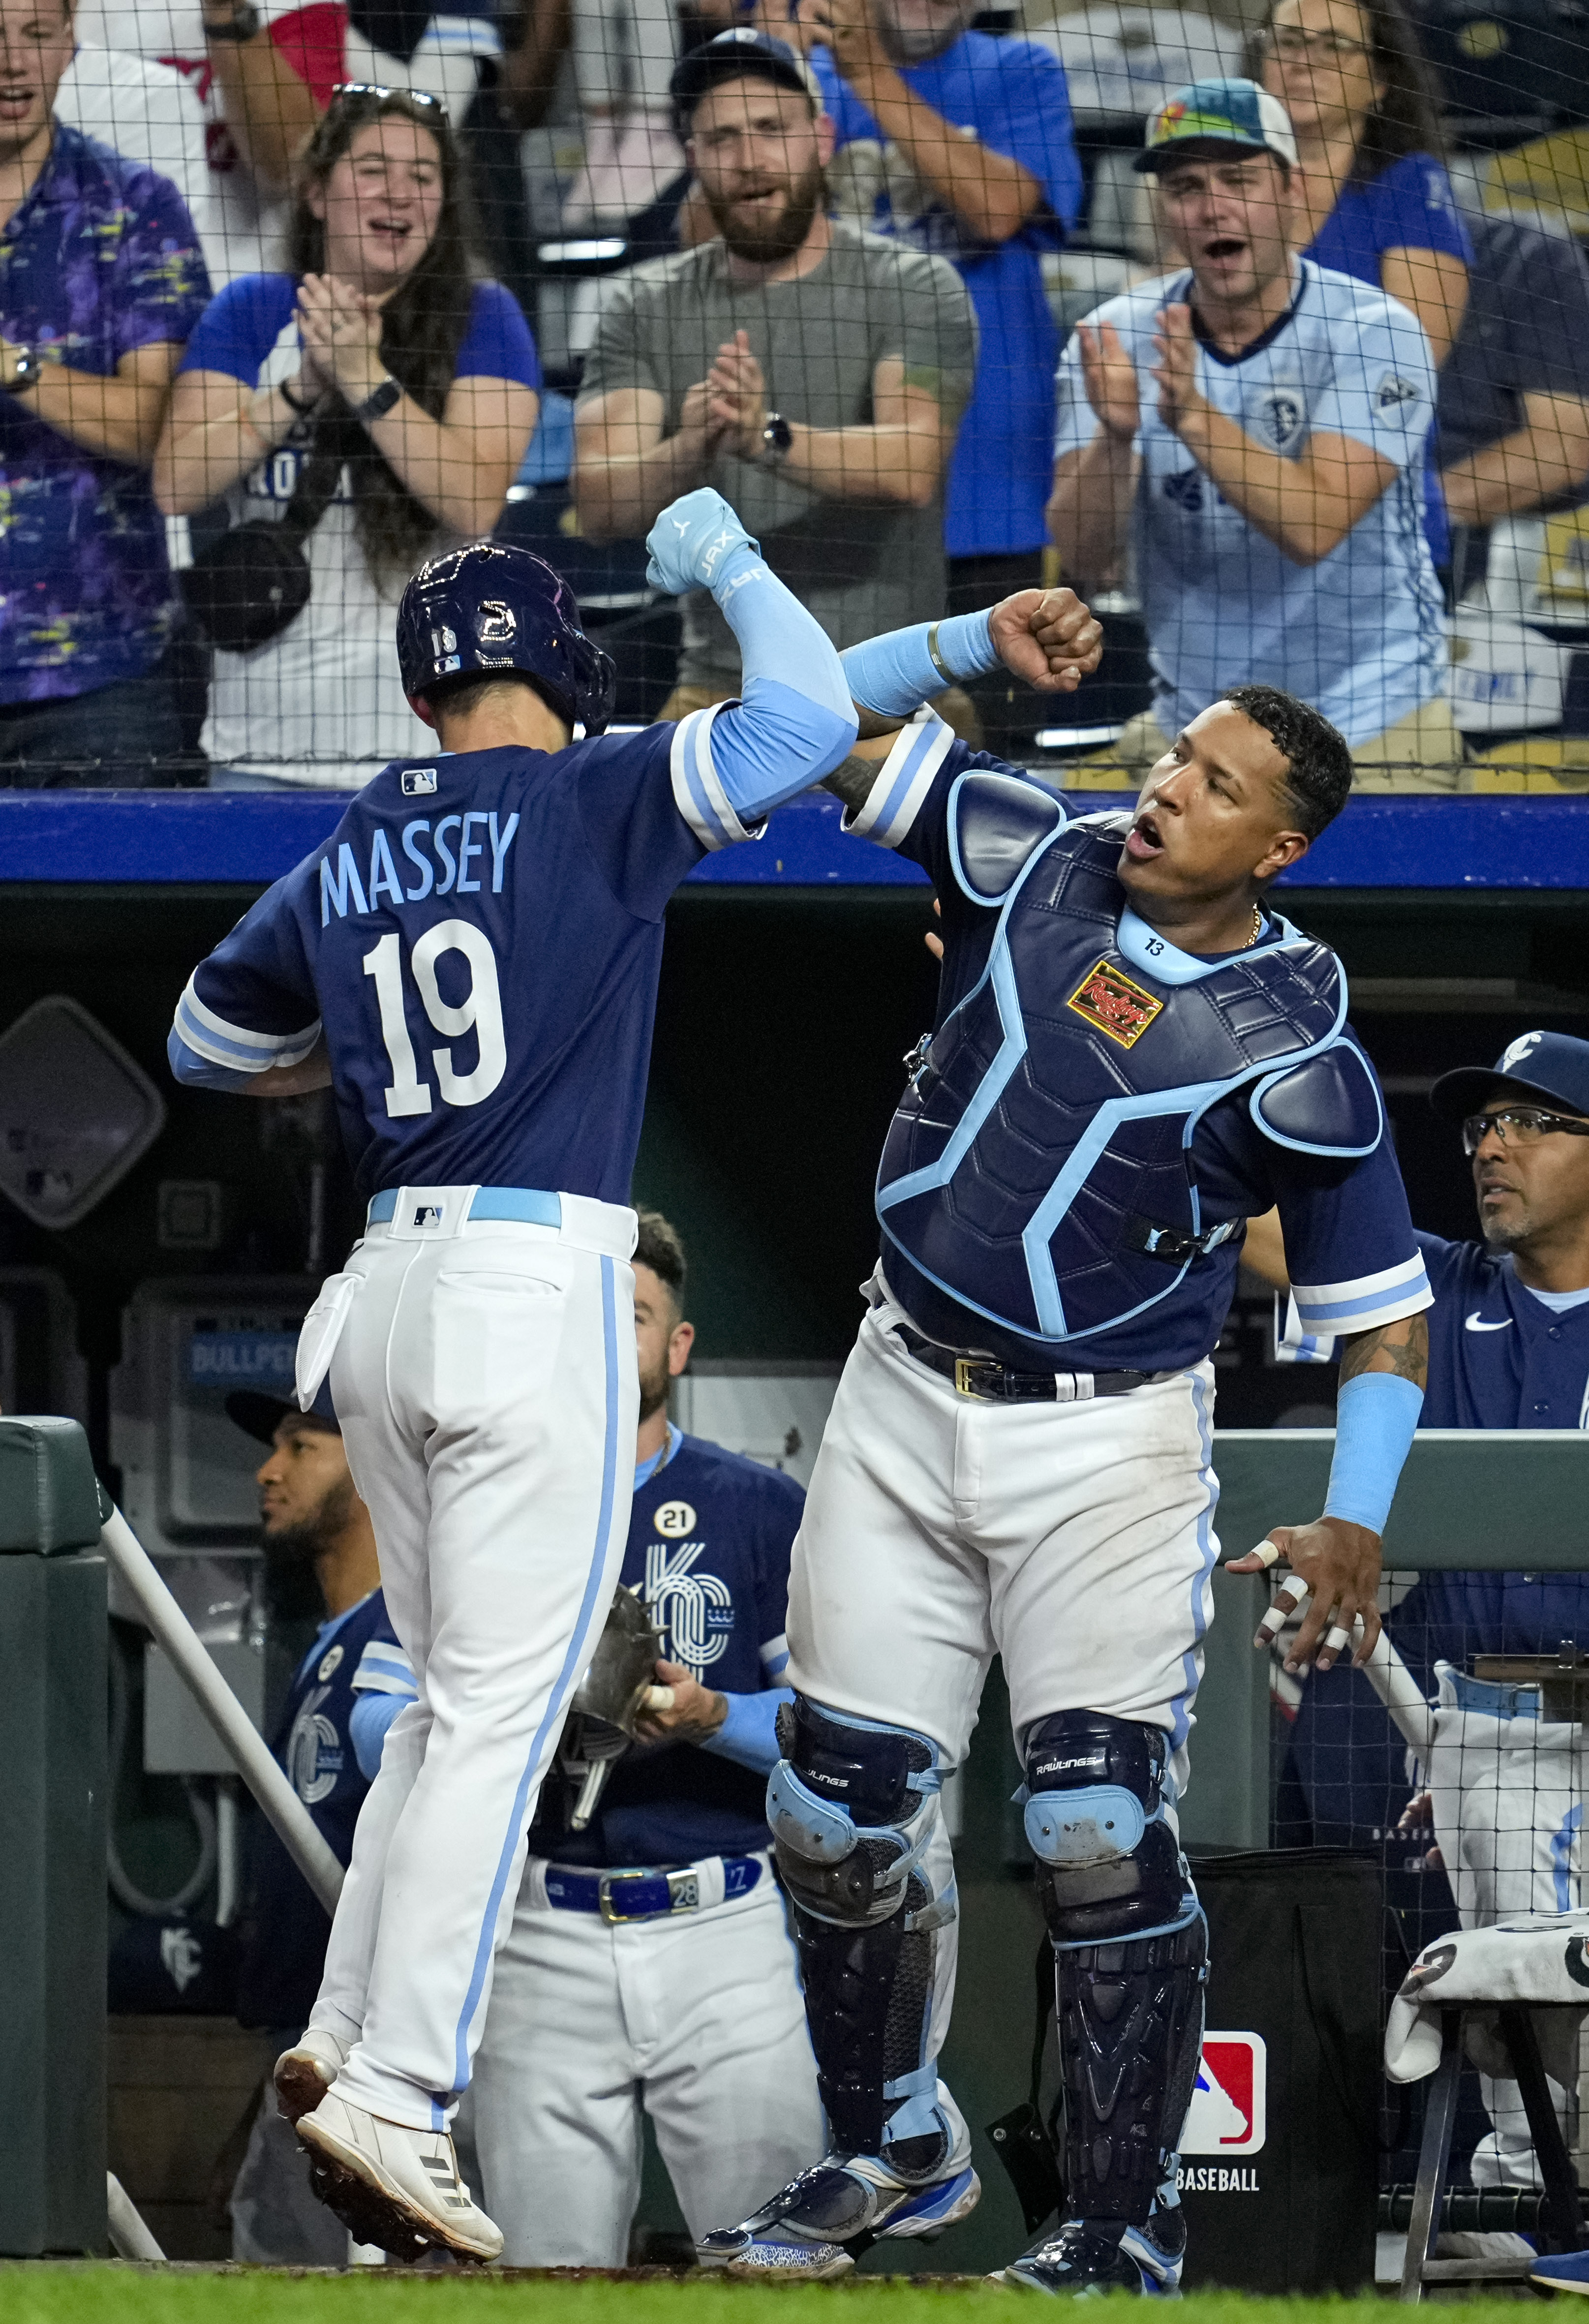 Kansas City Royals second baseman Michael Massey (19) celebrates with catcher Salvador Perez (21) after hitting a home run during the eighth inning against the Houston Astros at Kauffman Stadium. Mandatory Credit: Jay Biggerstaff